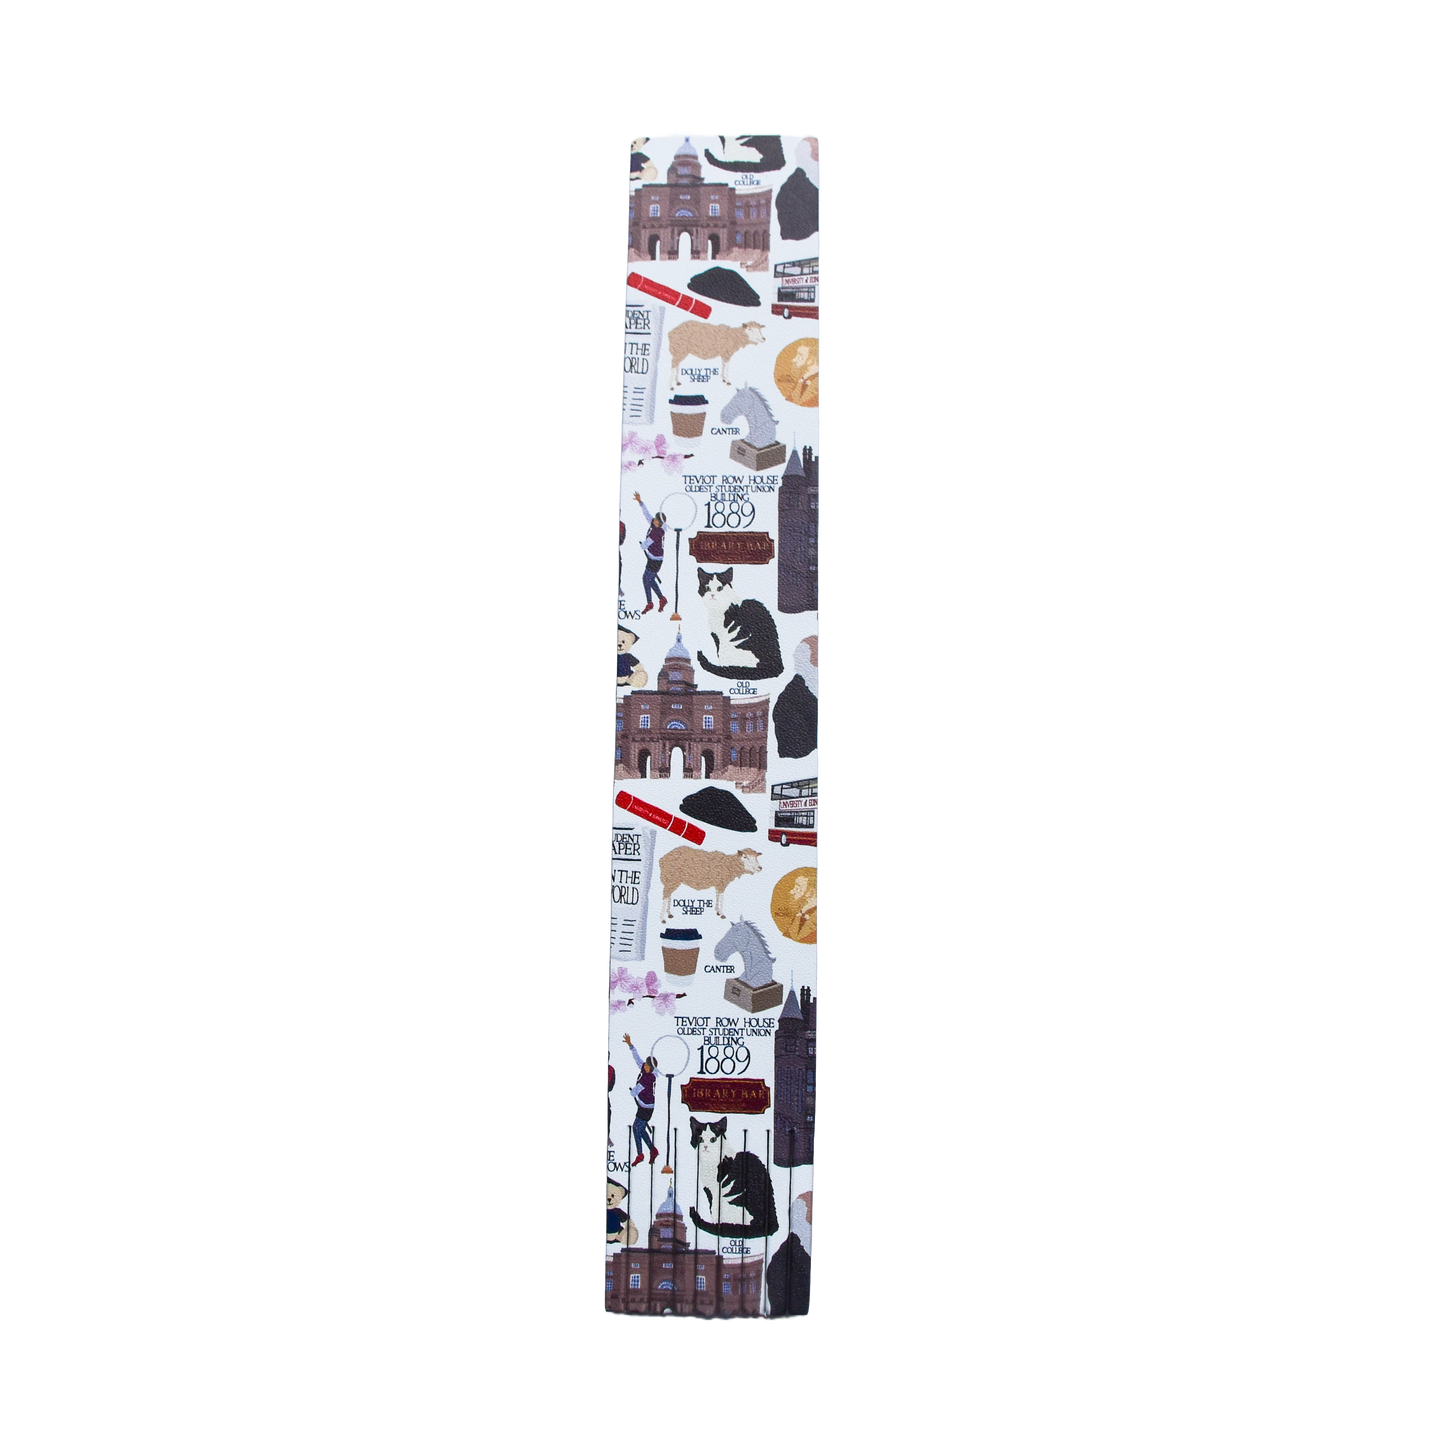 A close up of the Heritage Collection bookmark. It is a white background with various illustrated figures and images relating to the University of Edinburgh. It  has cut tassels on the bottom.